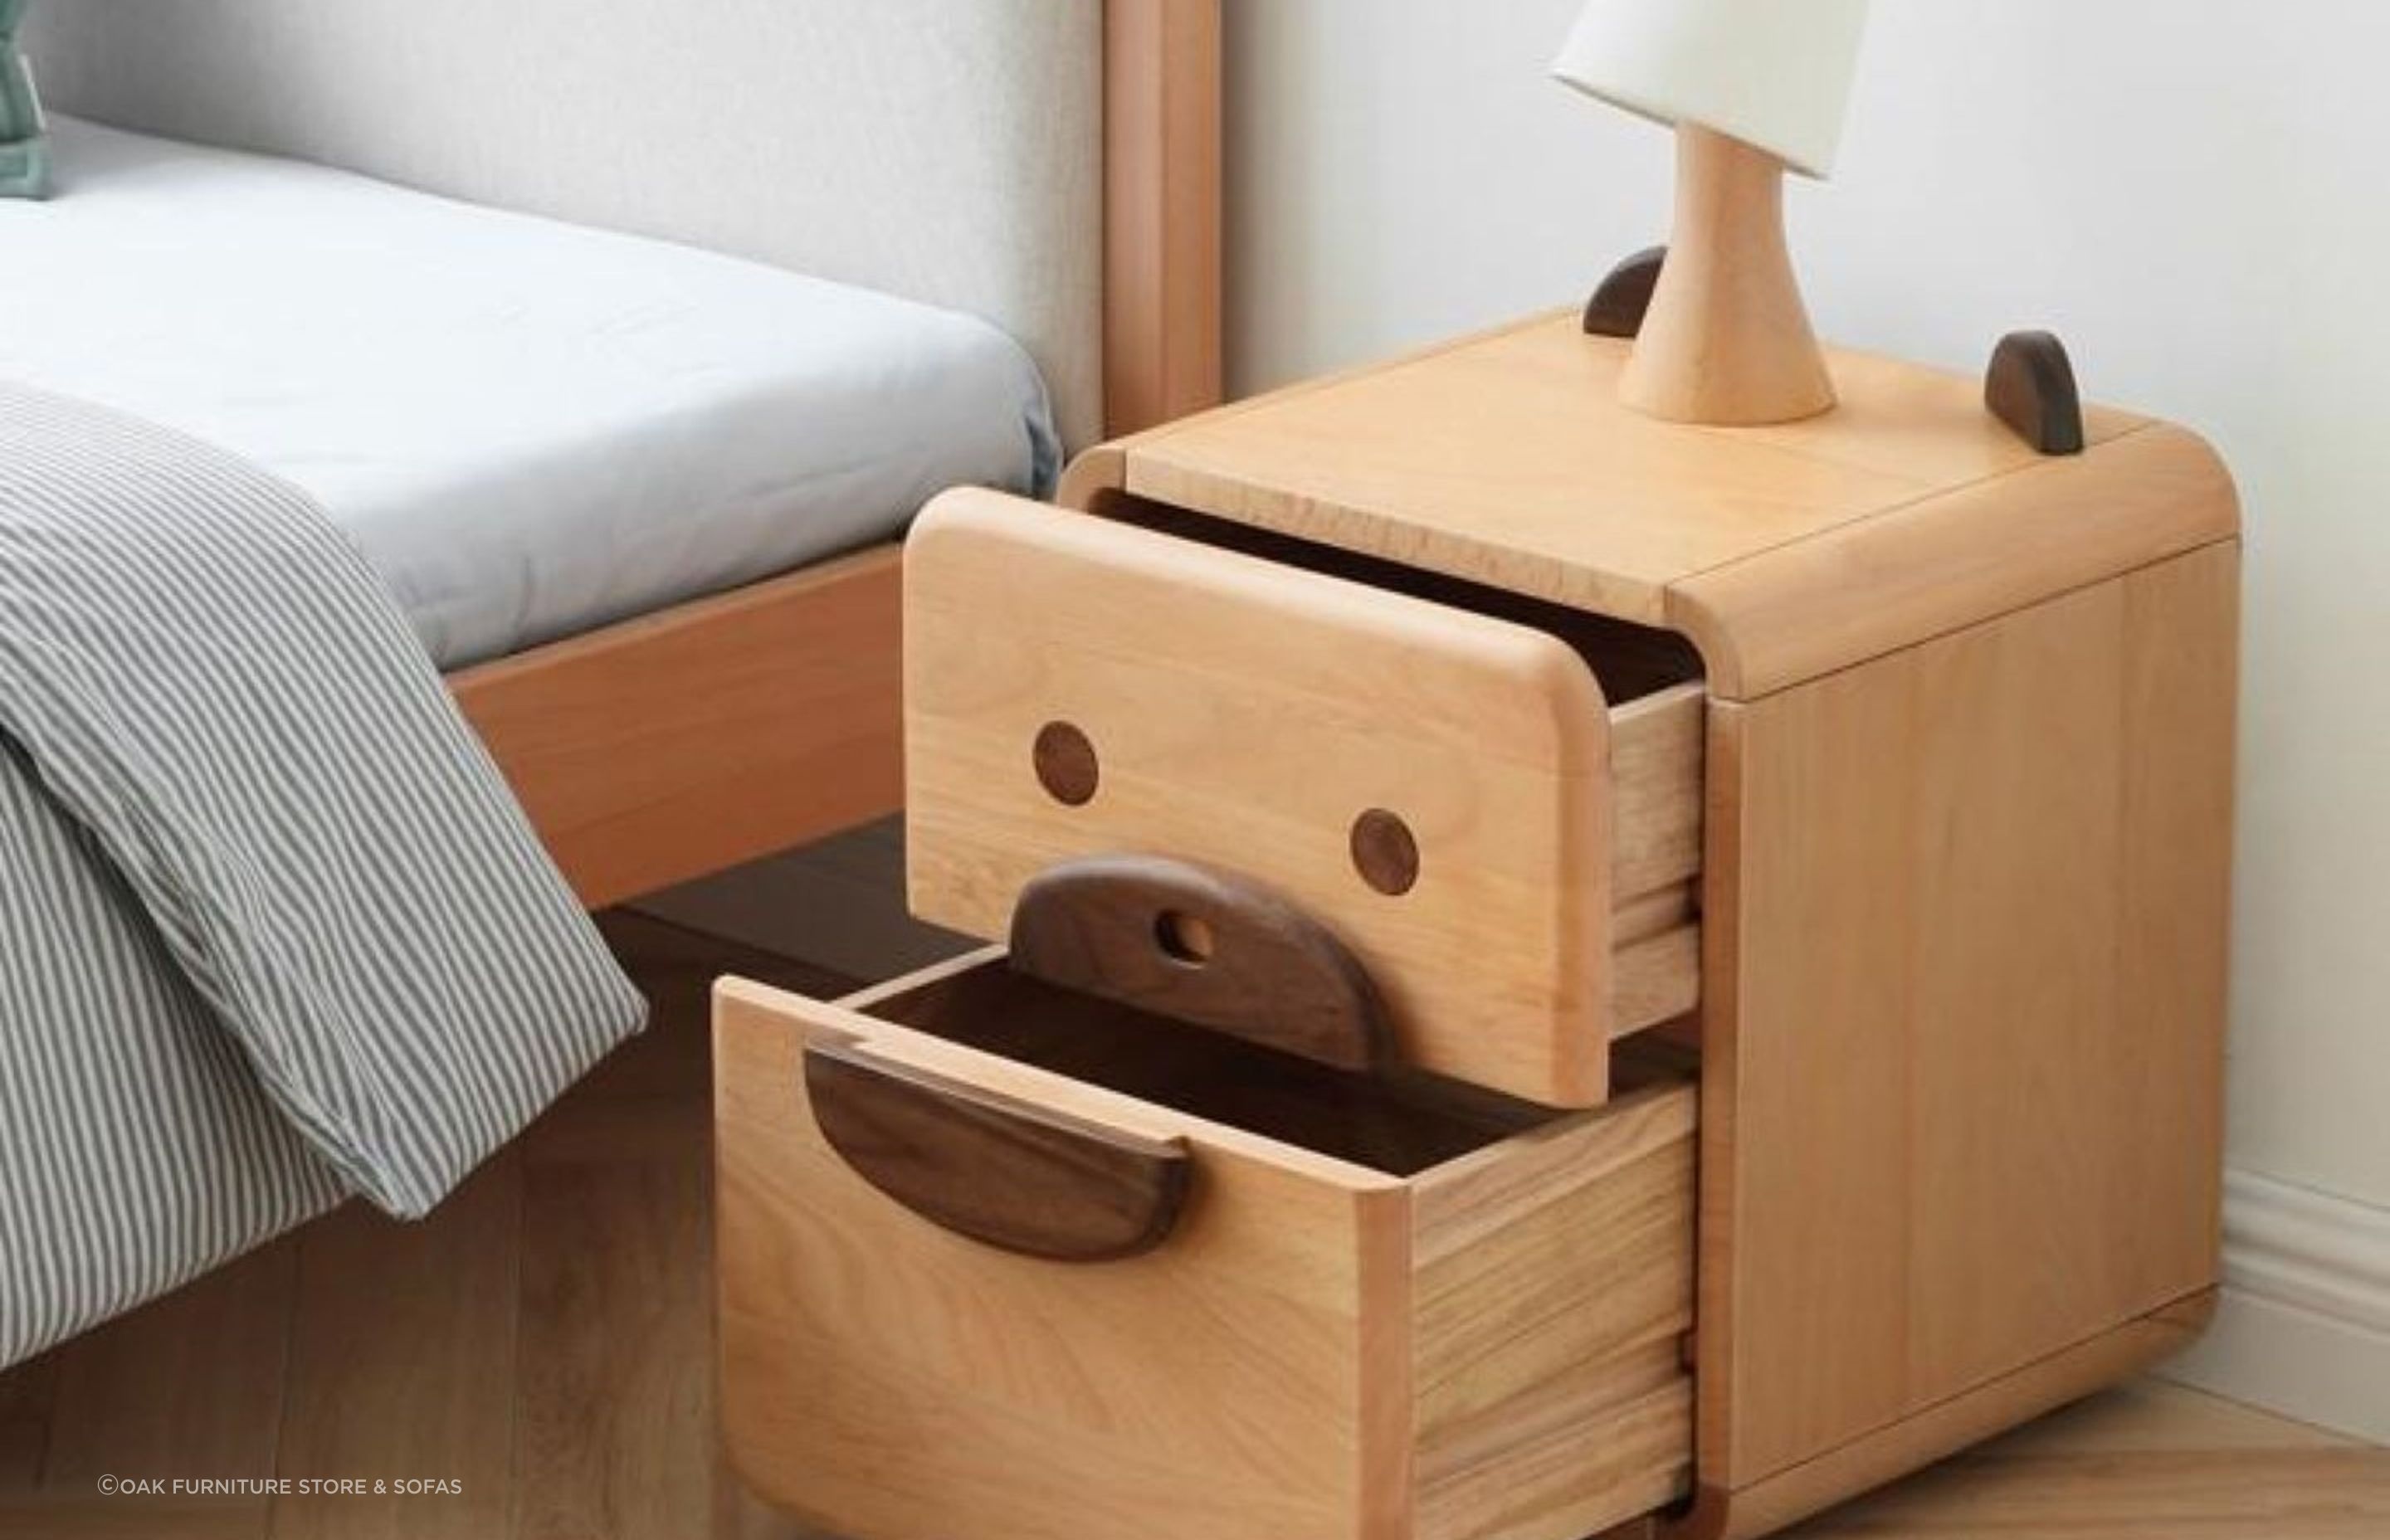 Kid's bedside tables can be playful and fun like the Urban Kidz Animal Oak Bedside Table.